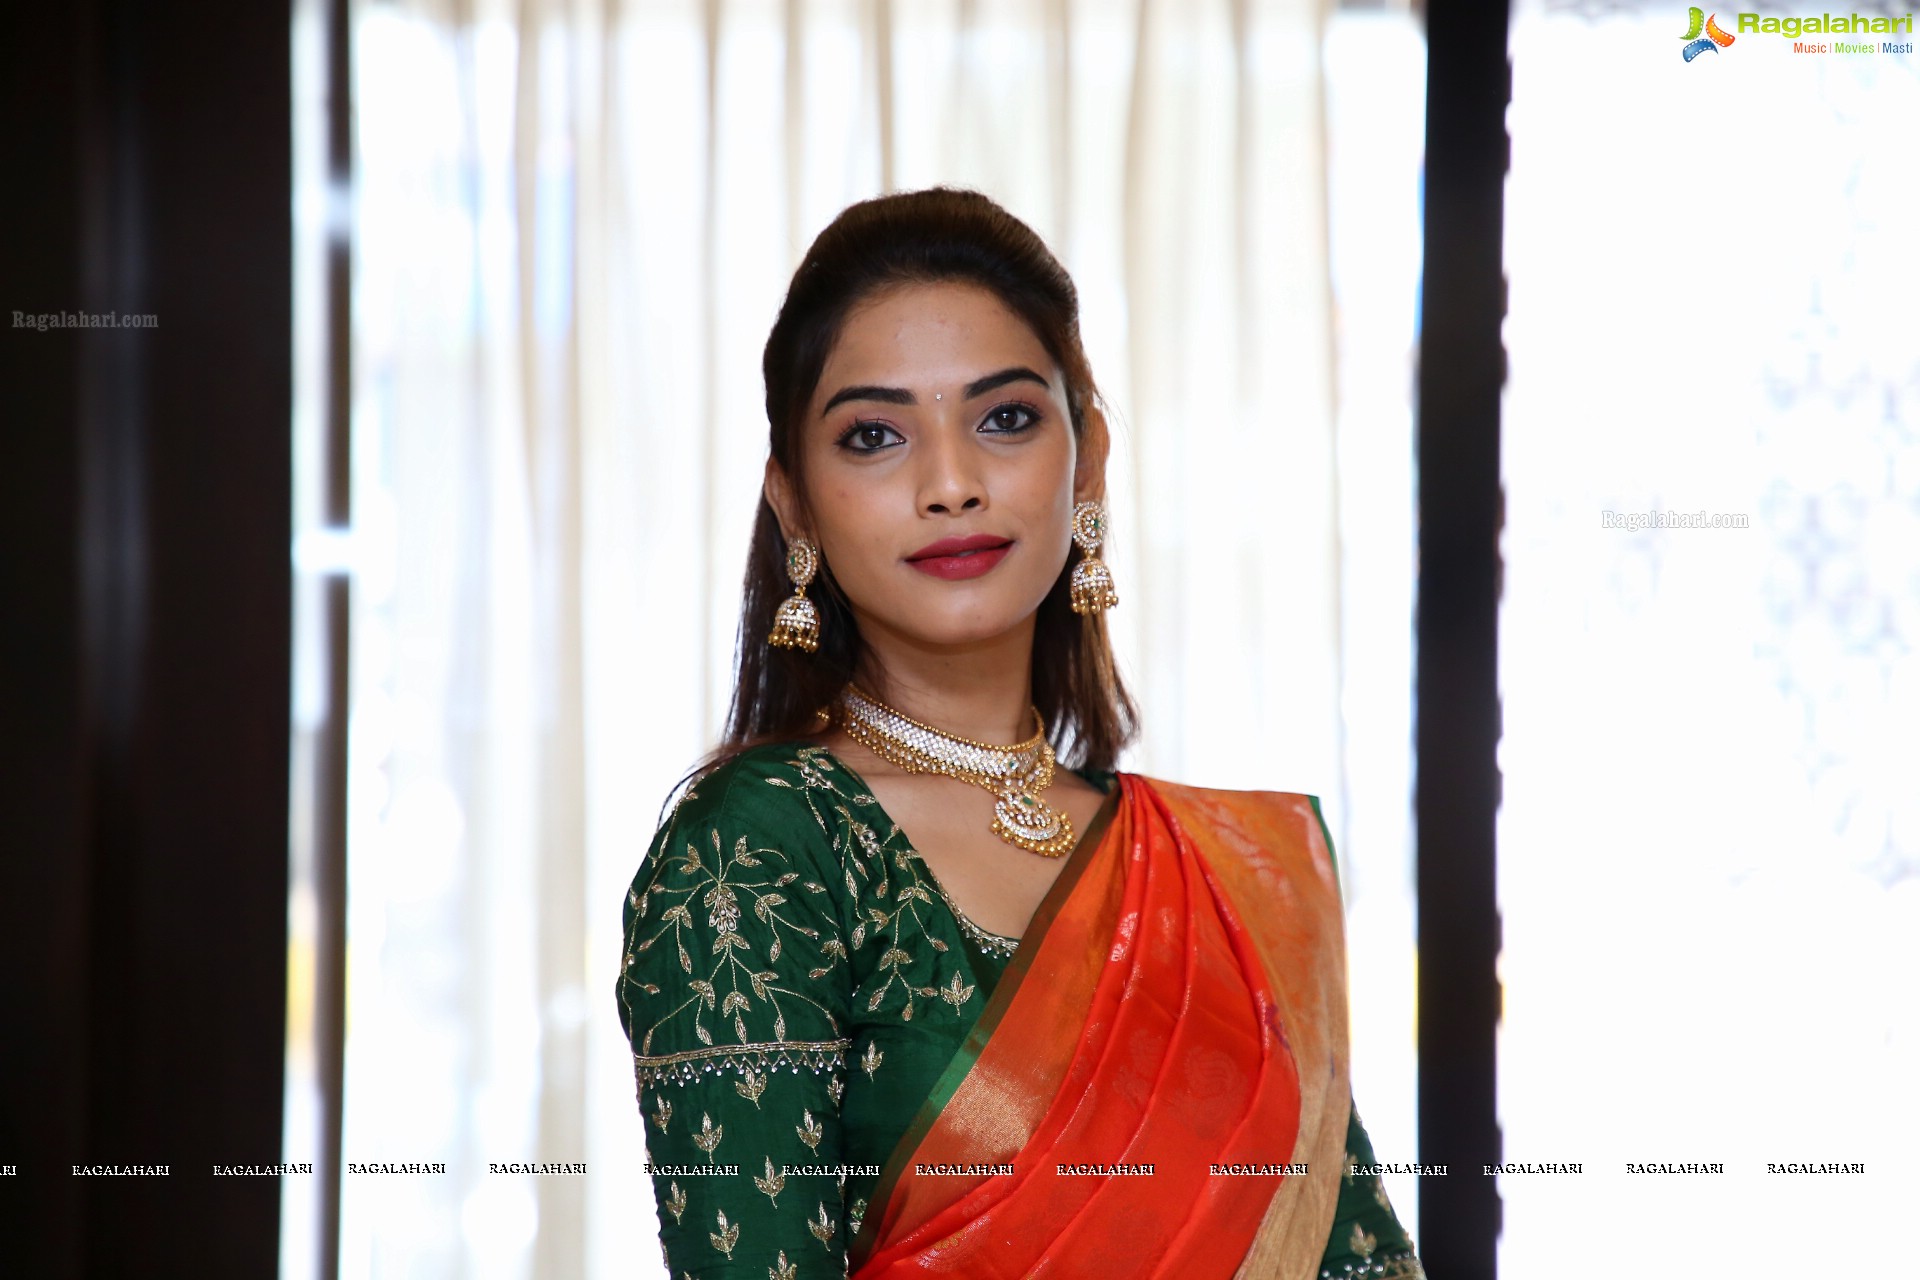 Harshini Balla Poses With Traditional Jewellery, HD Photo Gallery